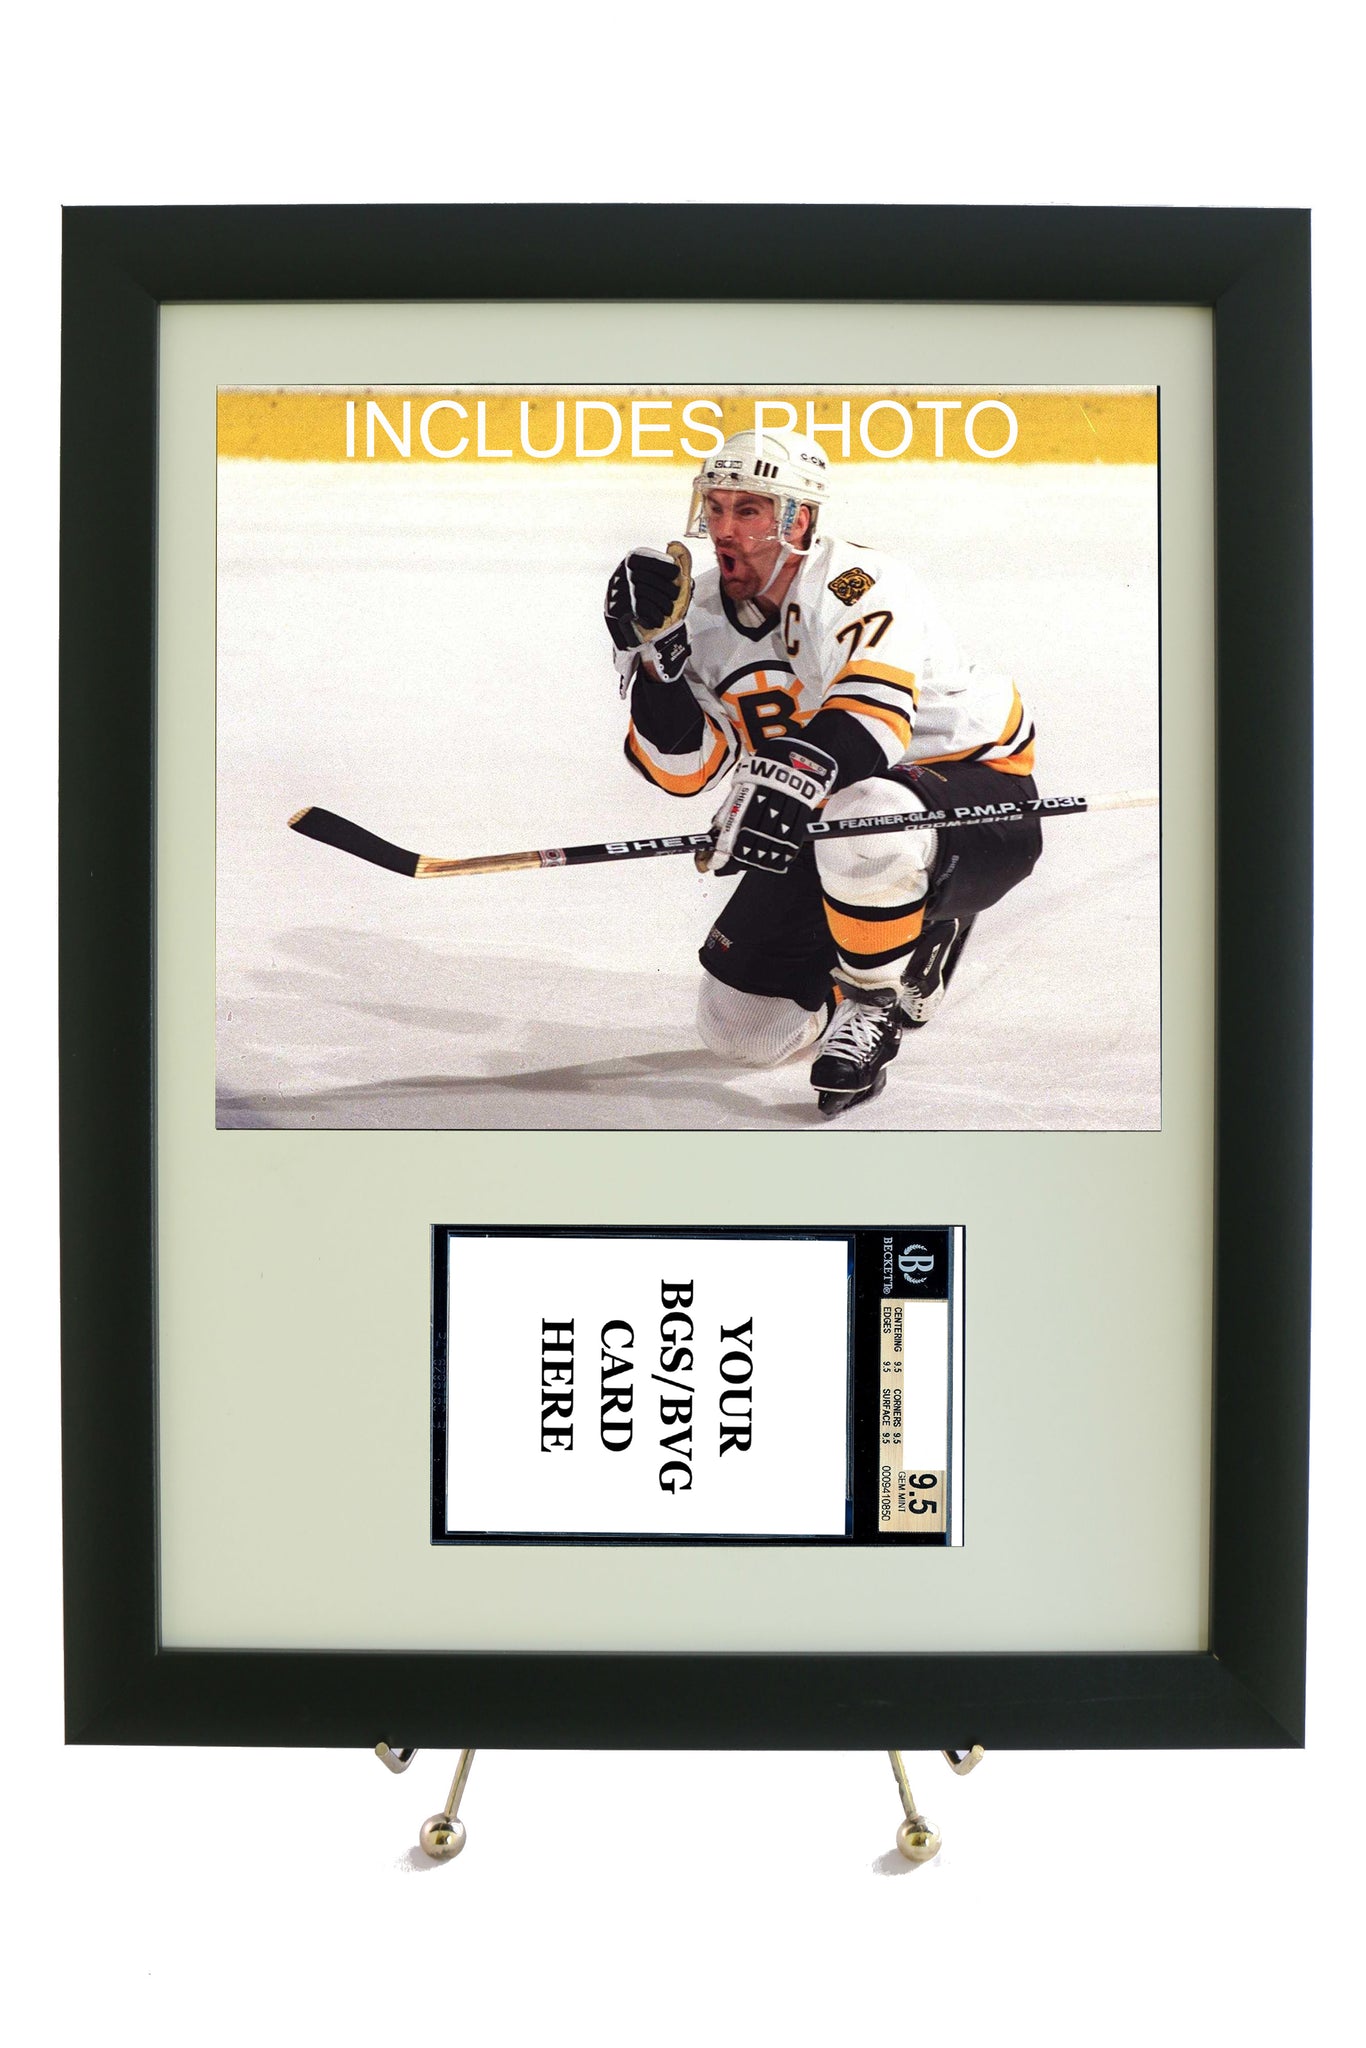 Sports Card Frame for YOUR BGS (Beckett) Ray Bourque Card (INCLUDES PHOTO) - Graded And Framed